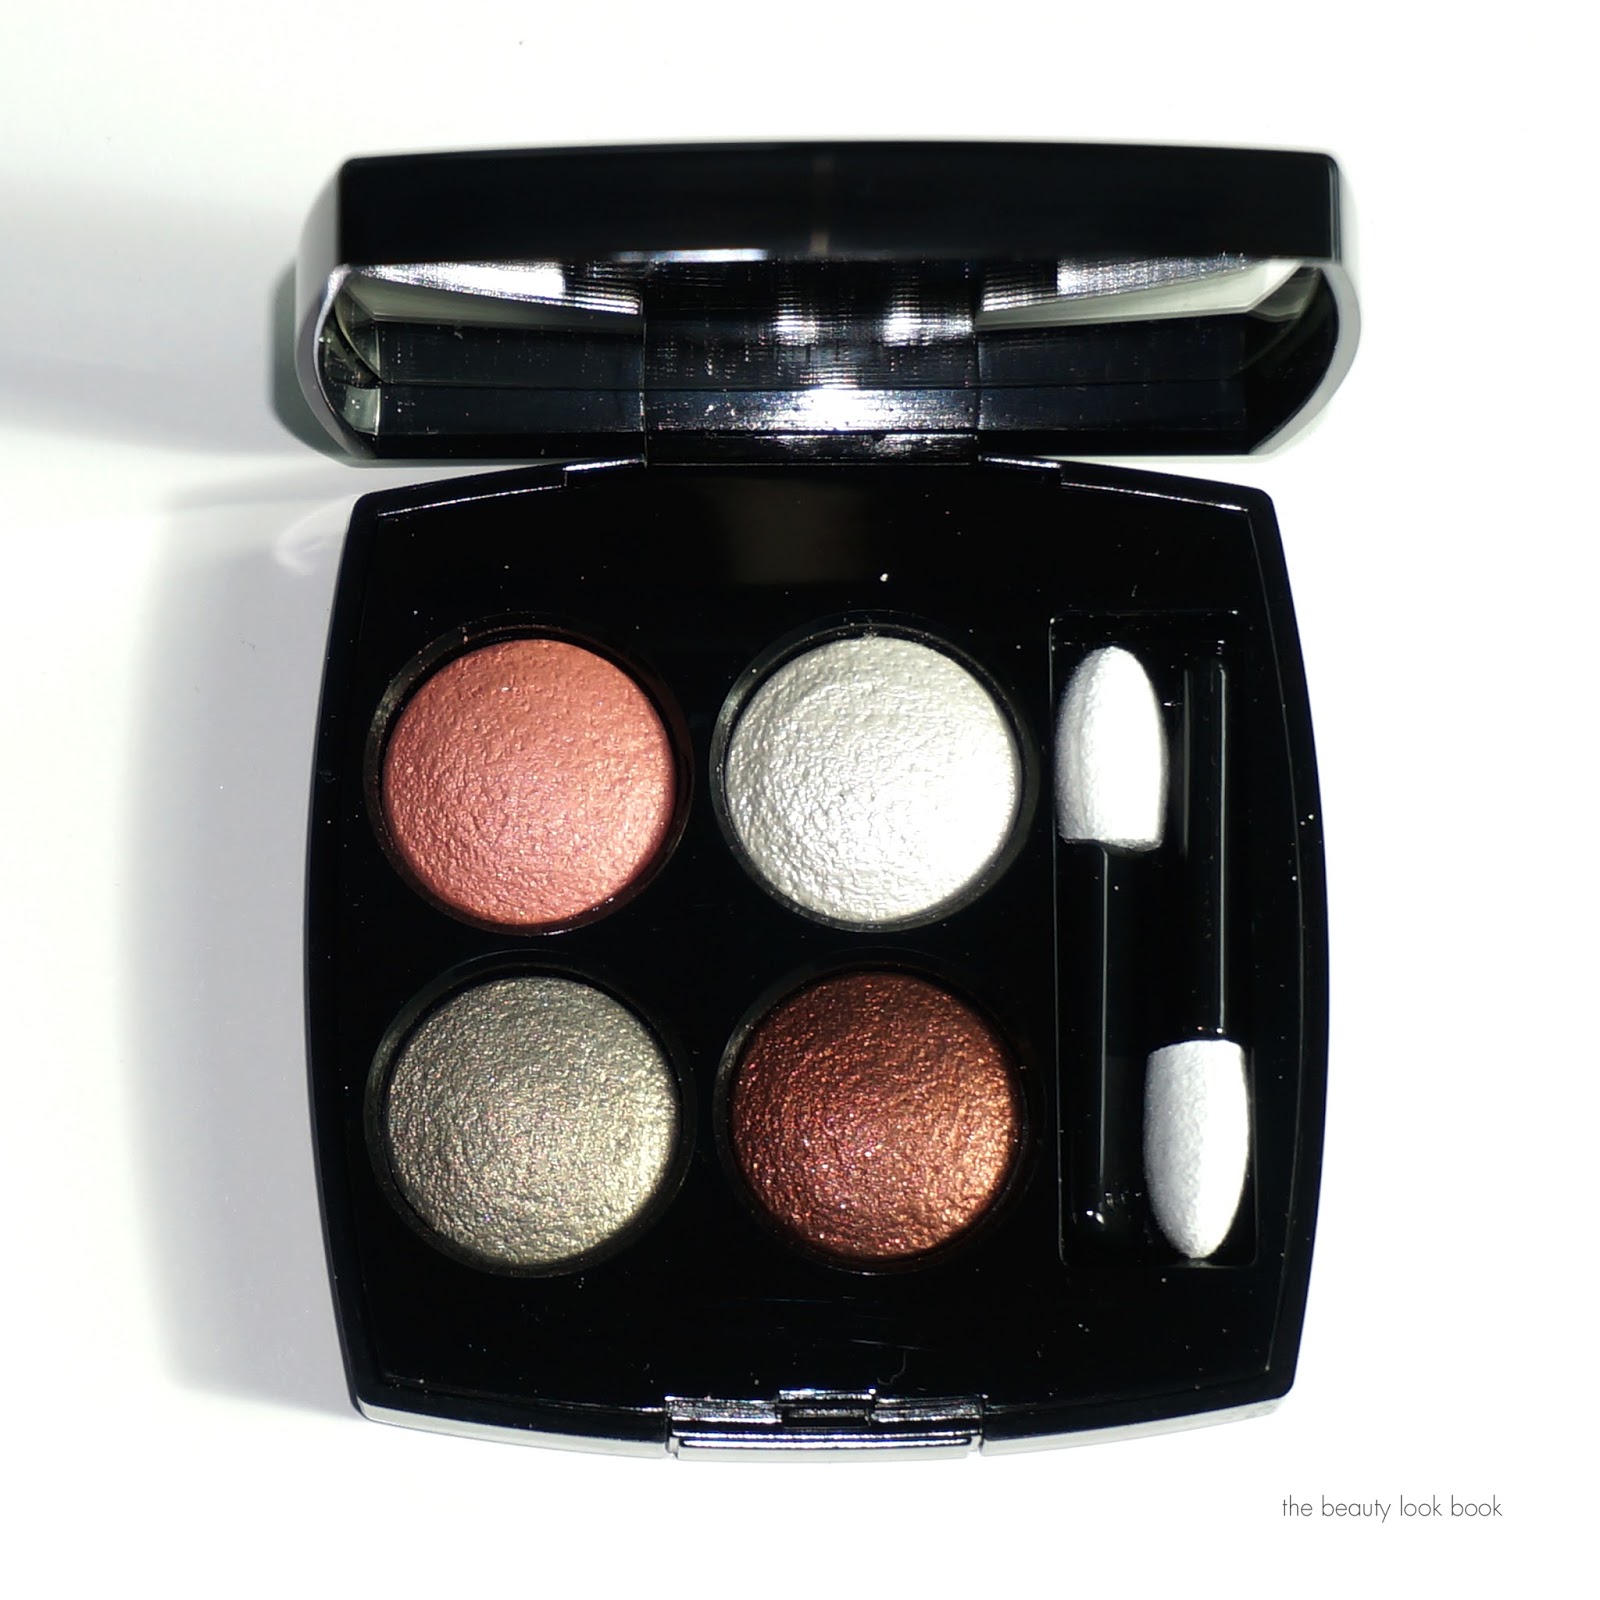 Eyeshadow Archives - Page 12 of 52 - The Beauty Look Book